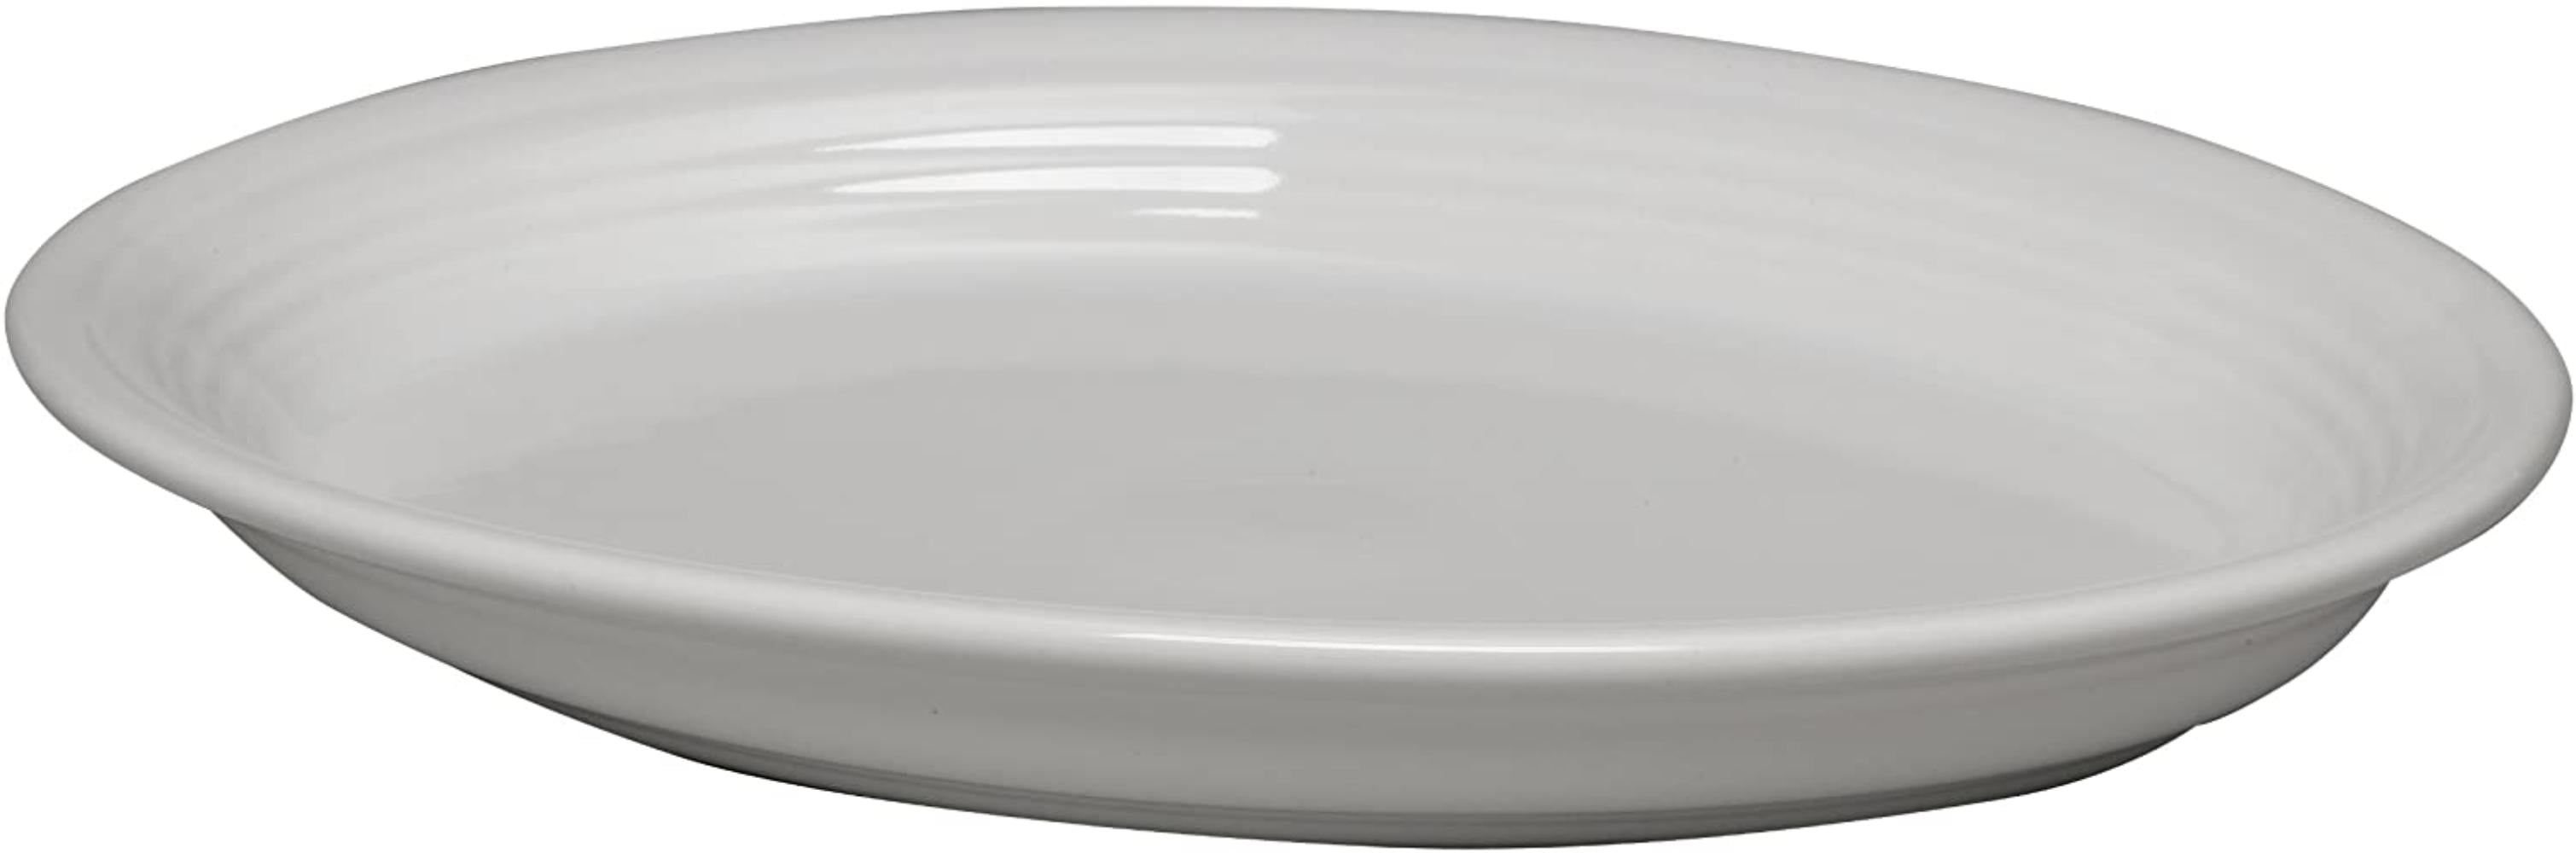 Haeger large condiment plate with removeable center